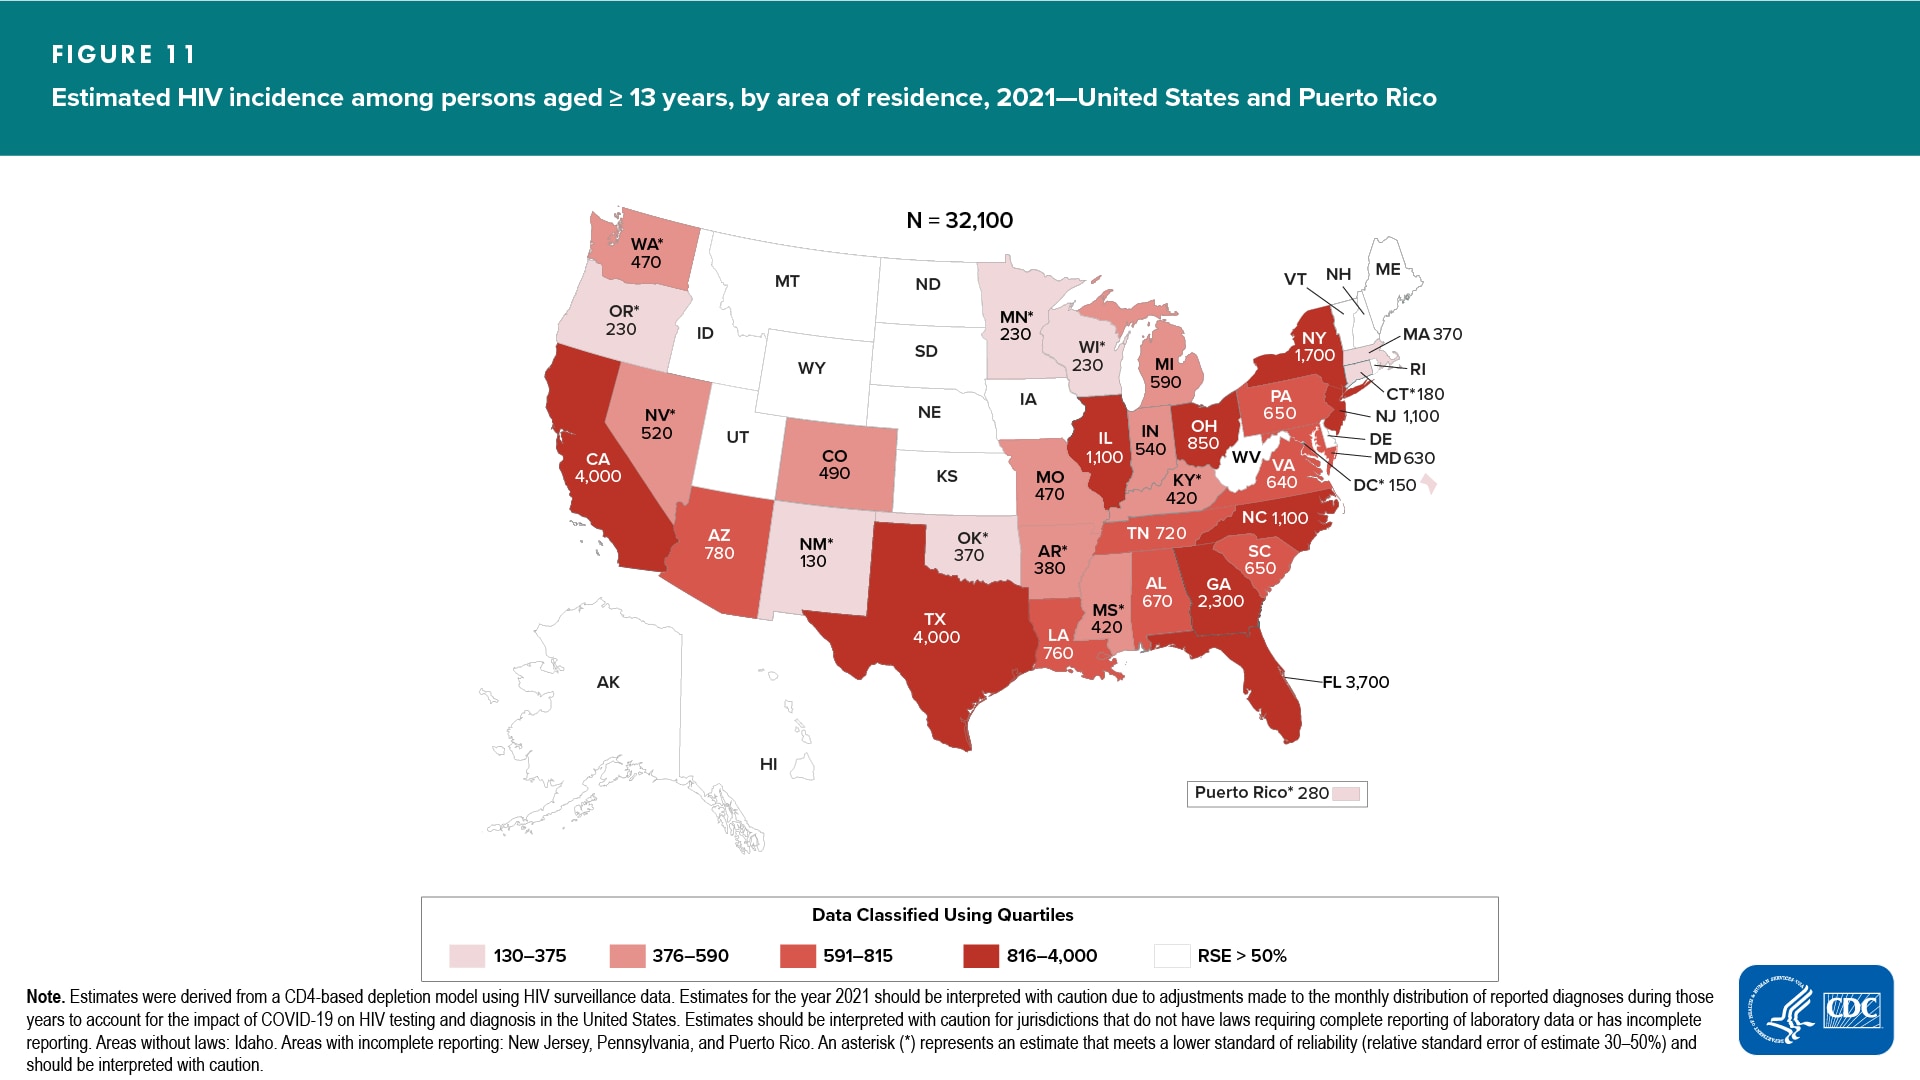 Figure 11. Estimated HIV incidence among persons aged ≥13 years, by area of residence, 2021—United States and Puerto Rico